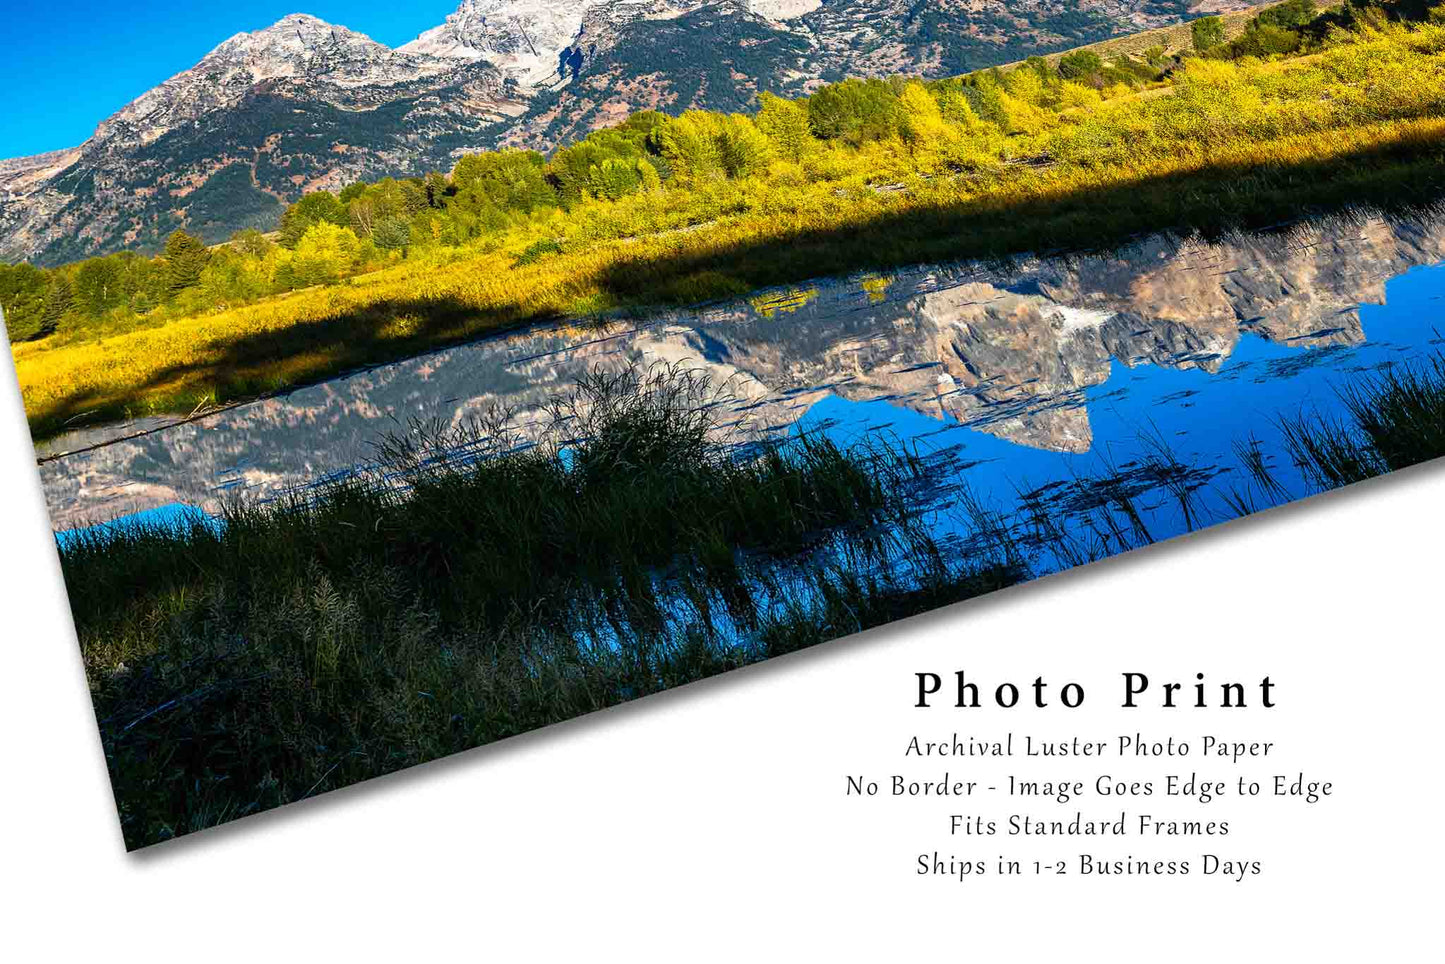 Grand Teton Photography Print | National Park Picture | Wyoming Wall Art | Rocky Mountain Photo | Nature Decor | Not Framed